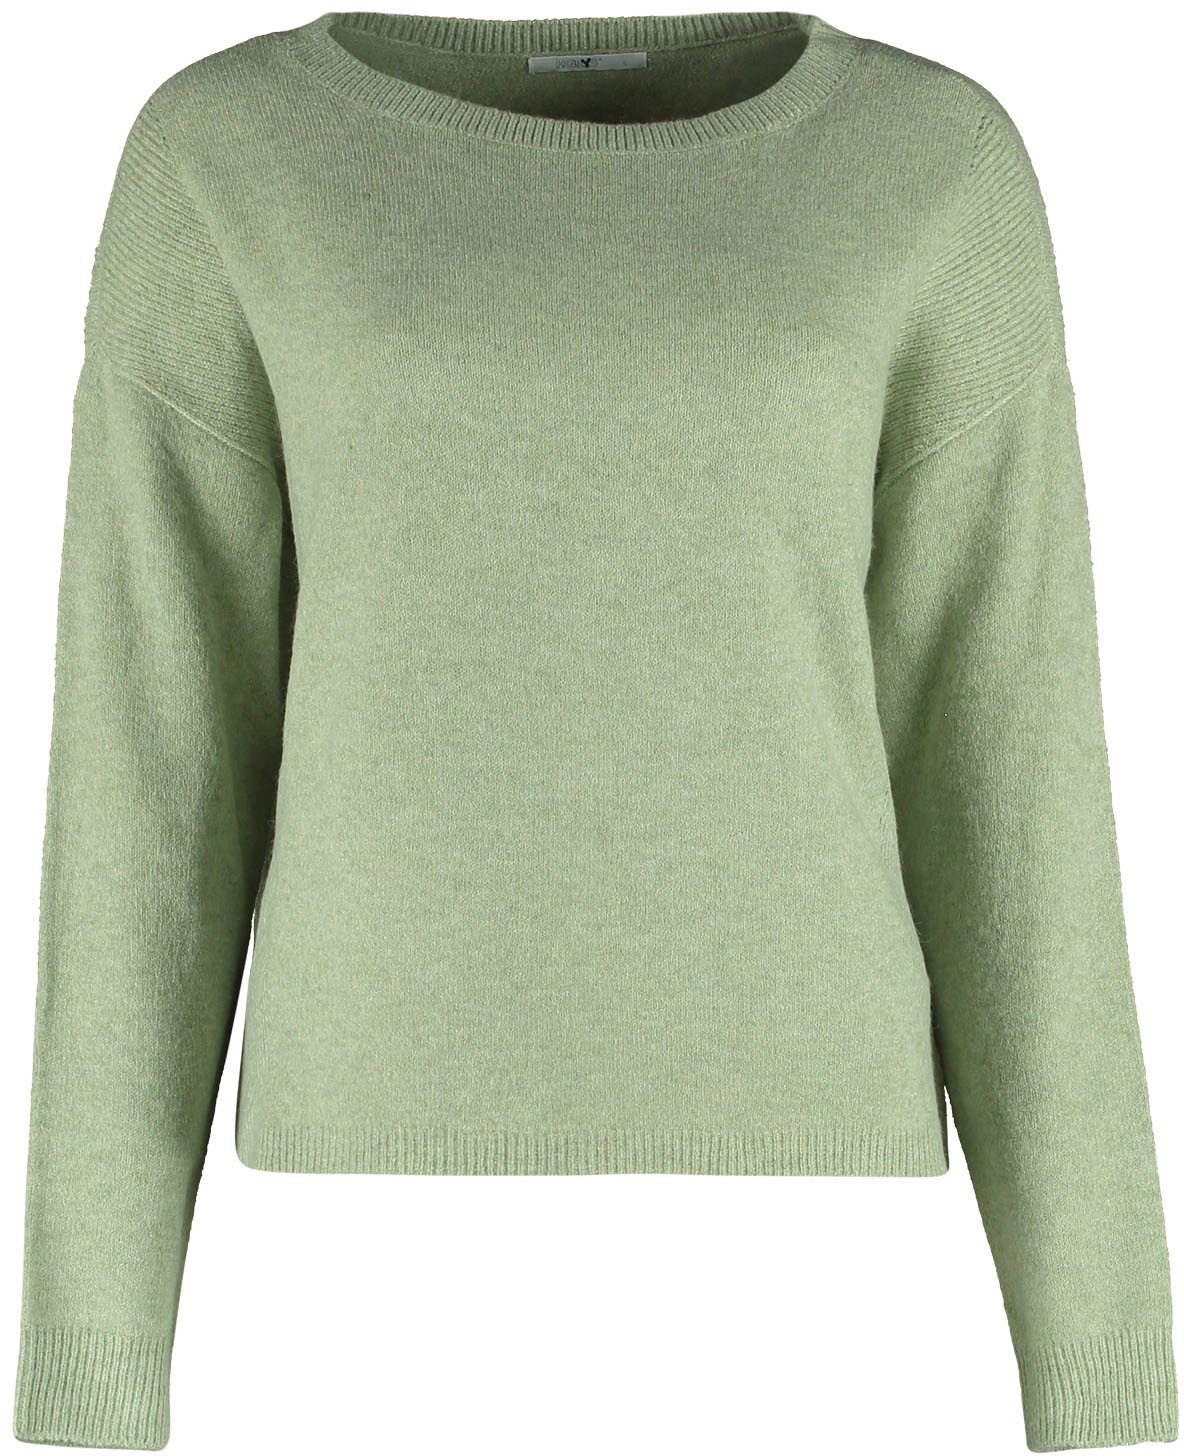 HaILY\'S P Tine« »LS SK Strickpullover